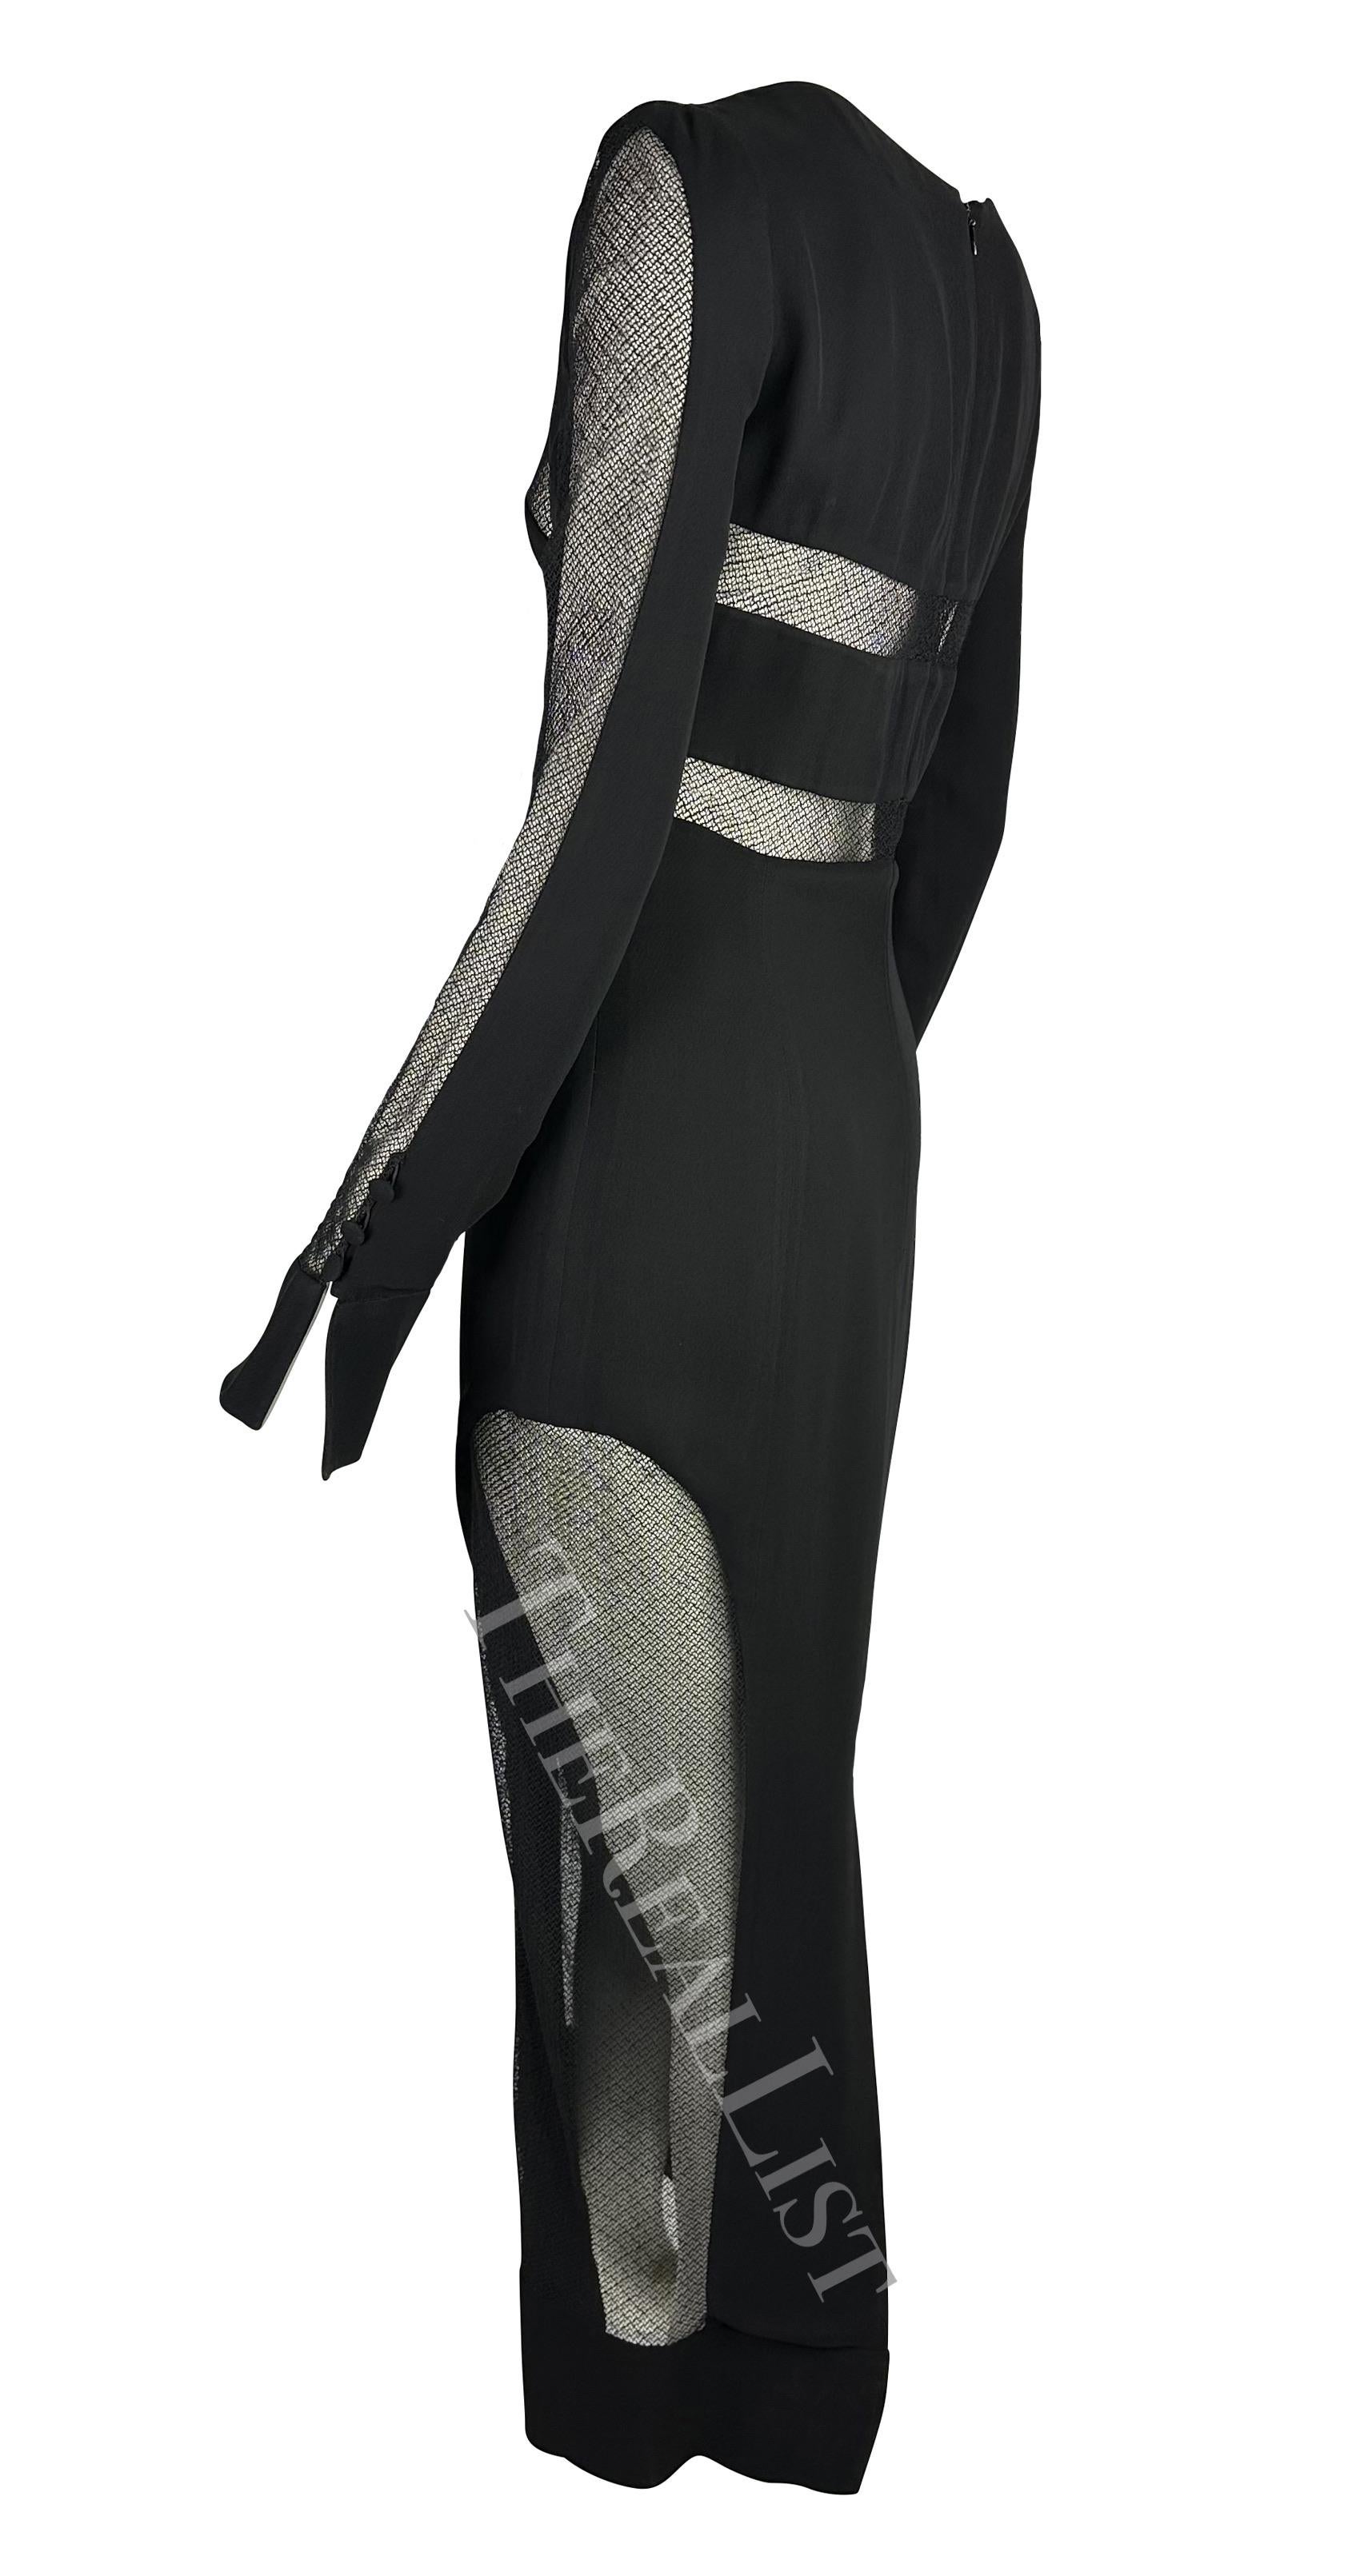 Presenting a striking mesh panel maxi dress designed by Karl Lagerfeld for his Fall/Winter 1993 collection. Supermodel Nadja Auermann wore a version of this gown in the season's runway presentation. This chic and sultry dress features multiple sheer